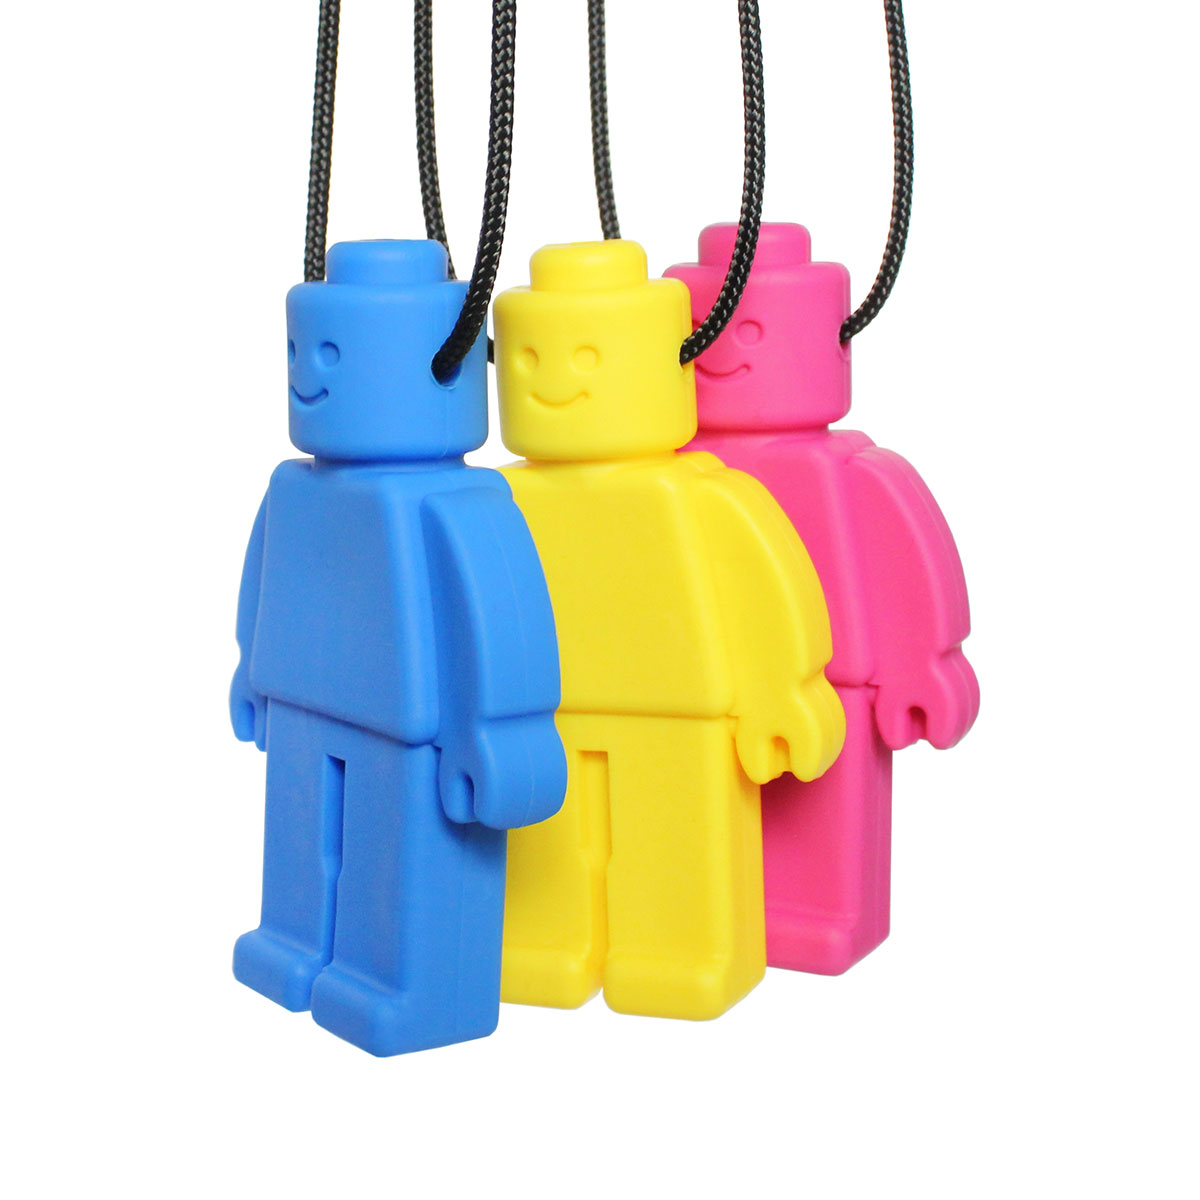 CHUIT Chewy Buddy Chew Necklace, The CHUIT Chewy Buddy Chew Necklace offers a fashionable and inconspicuous alternative for individuals seeking a chewing solution. Designed especially for LEGO enthusiasts, this chew necklace not only satisfies the need to chew but also serves as an oral fidget, providing comfort and relaxation during moments of distress or anxiety. Crafted with the utmost care and consideration for individuals with special needs, this chew necklace is proudly manufactured by us. Choose the 